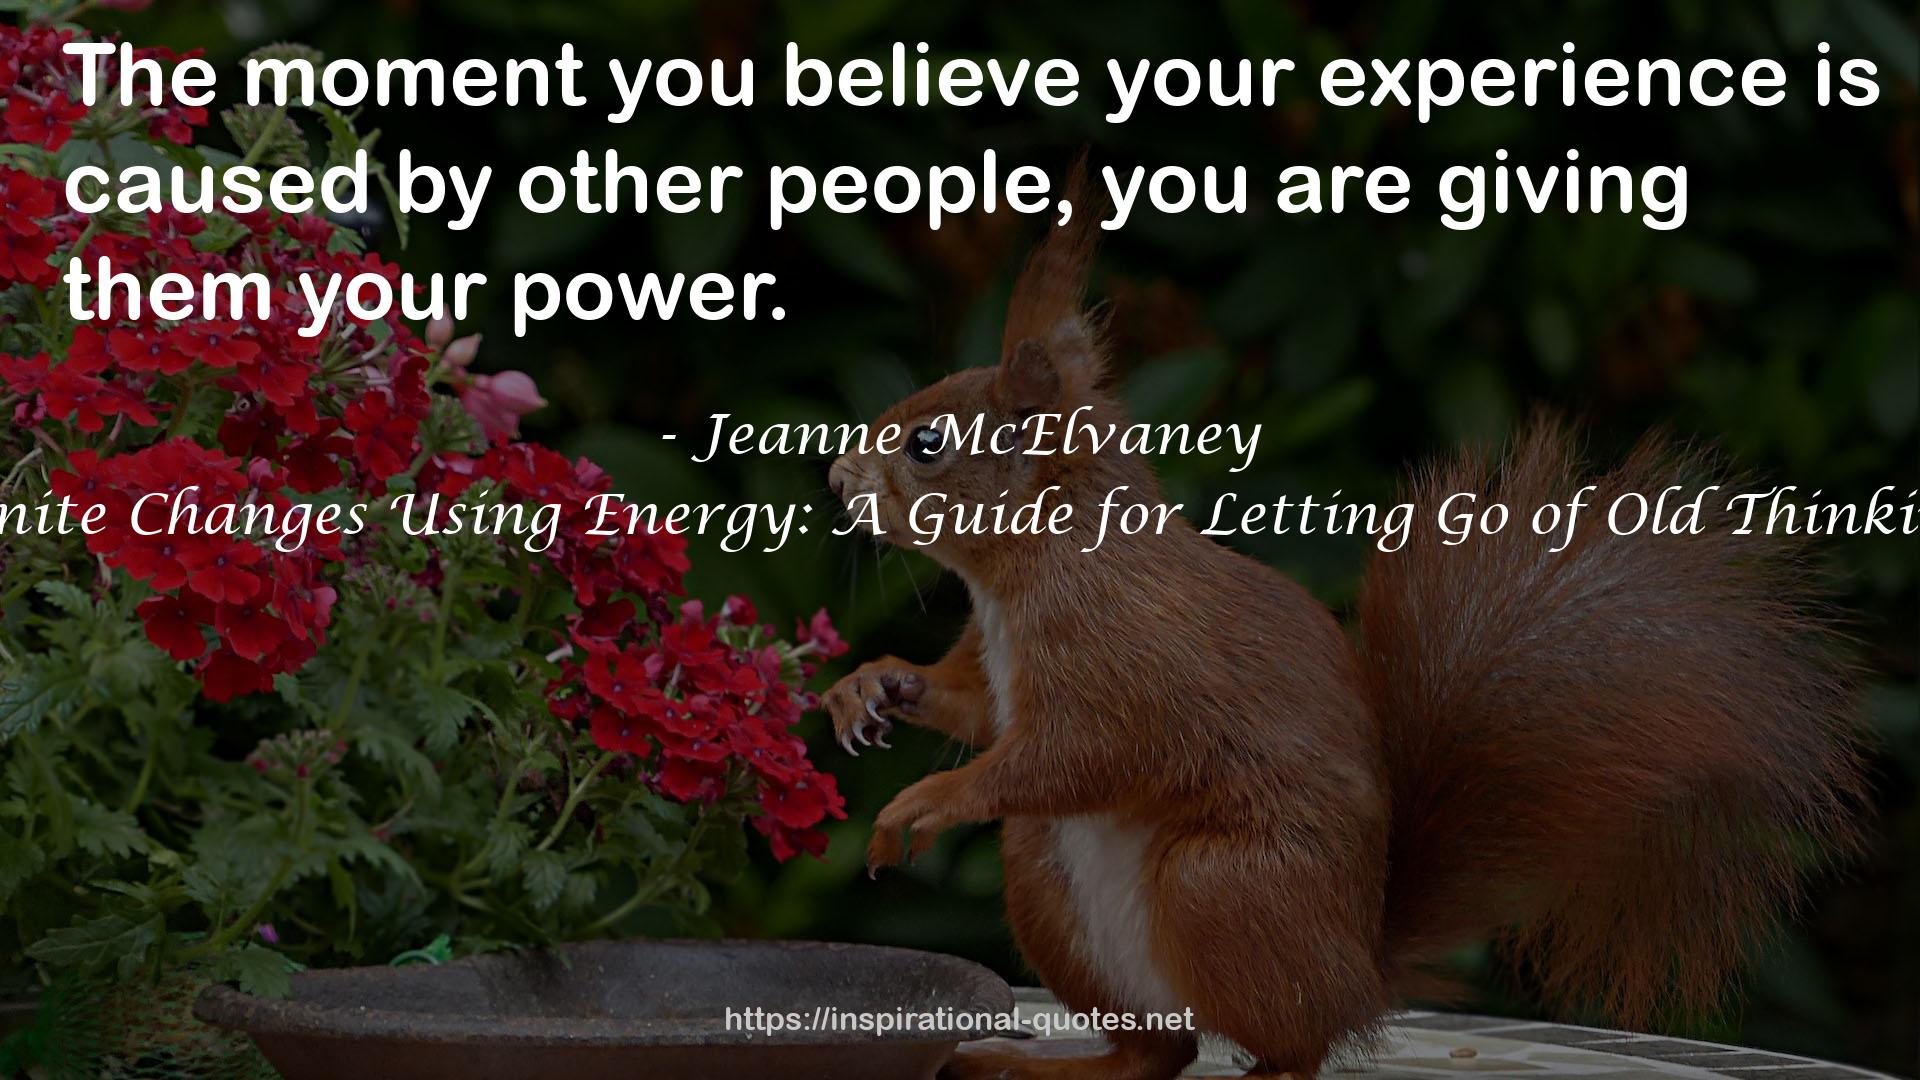 Ignite Changes Using Energy: A Guide for Letting Go of Old Thinking QUOTES